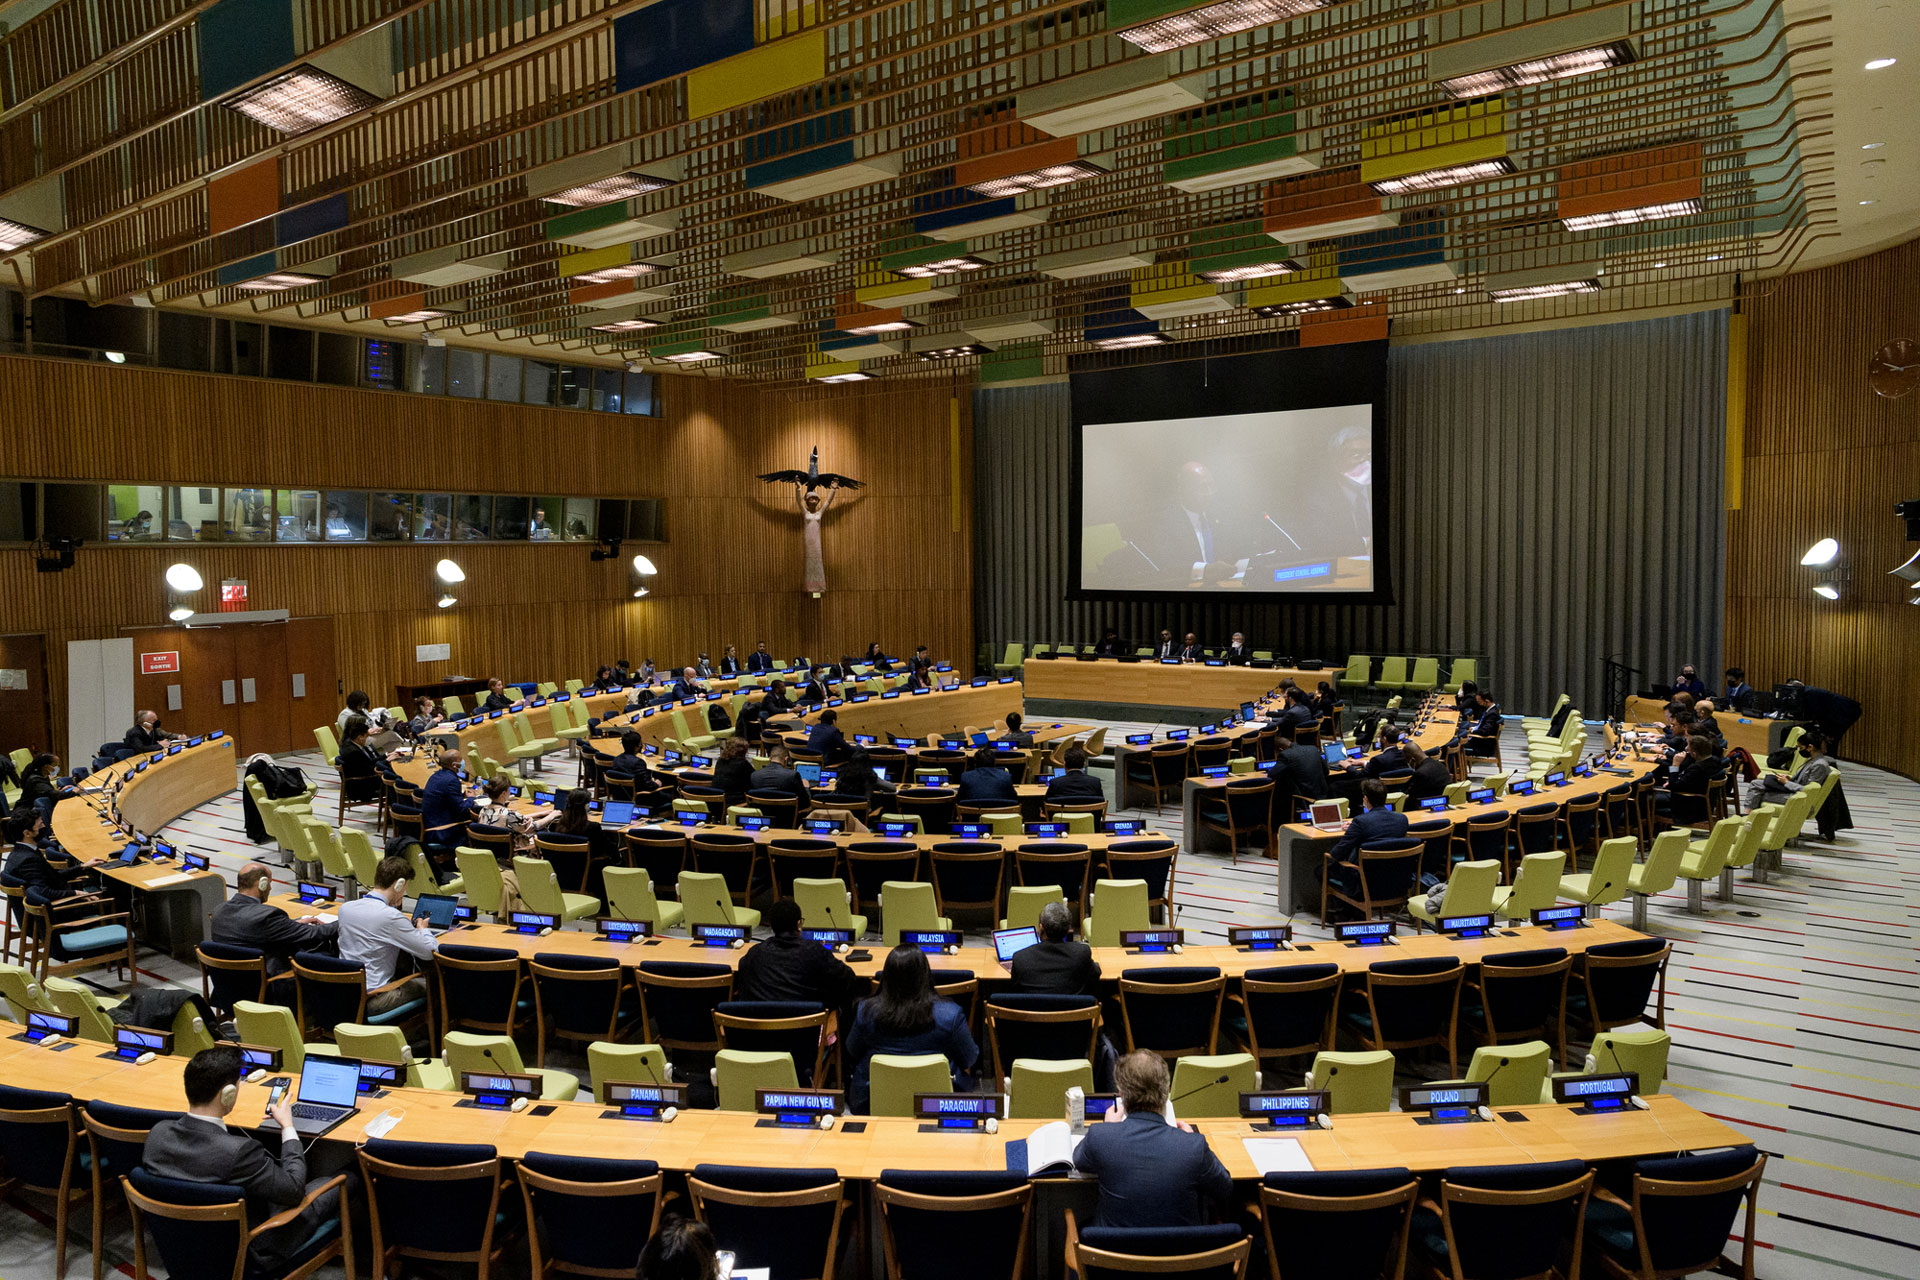 <p><sub>A wide view of the Trusteeship Council Chamber during the event “Interactive Dialogue of the Assembly on Commodity Markets”.</sub></p>